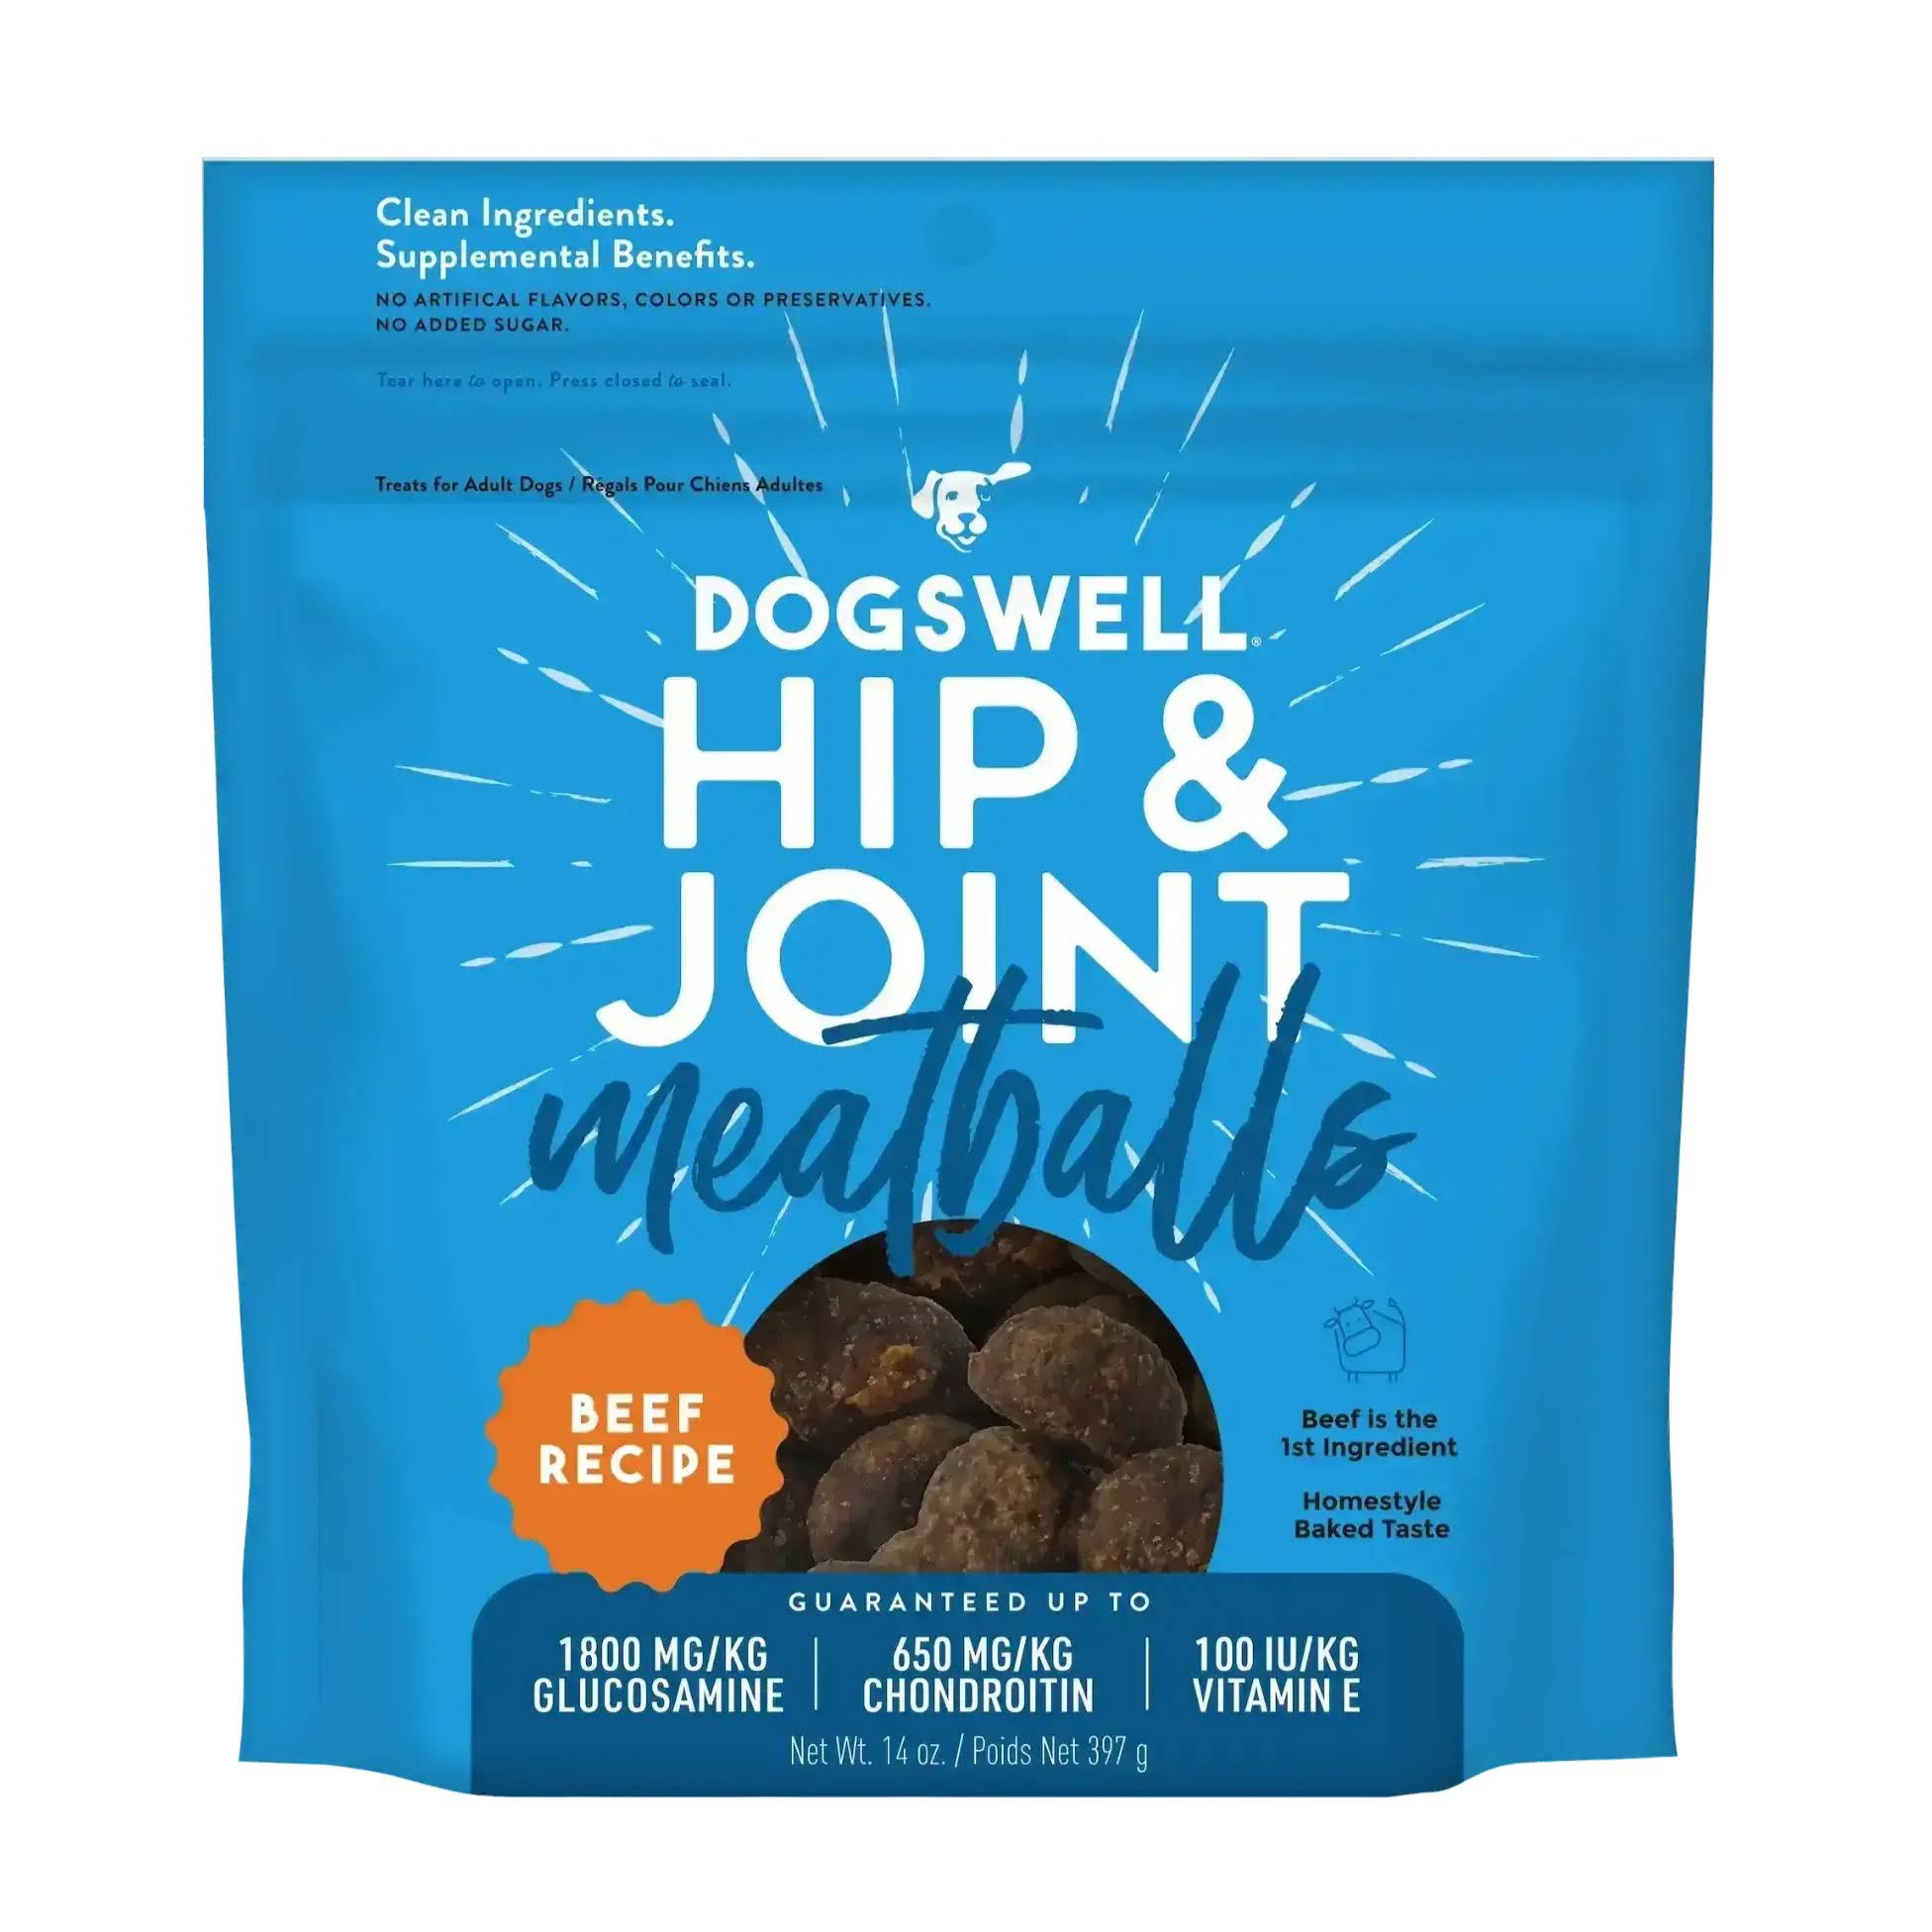 Dogswell Hip & Joint Beef Recipe Meatballs Dog Treats, 14 oz.